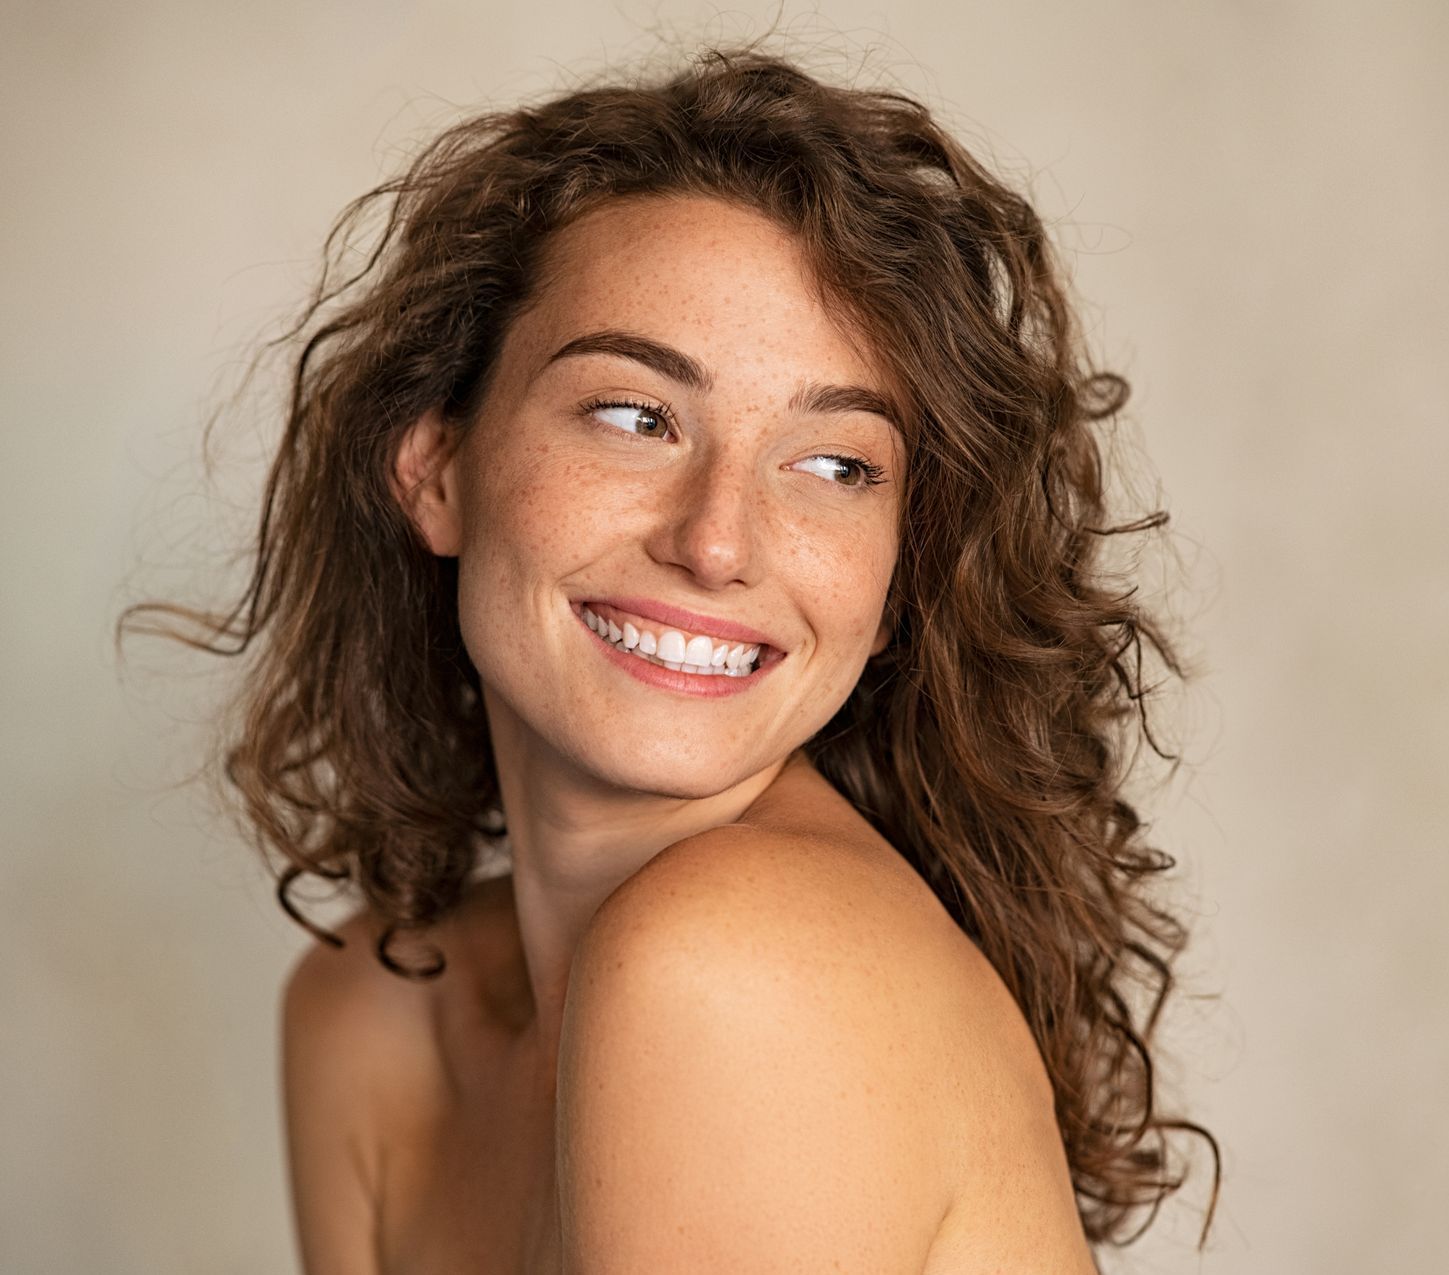 A woman with curly hair is smiling and looking over her shoulder.